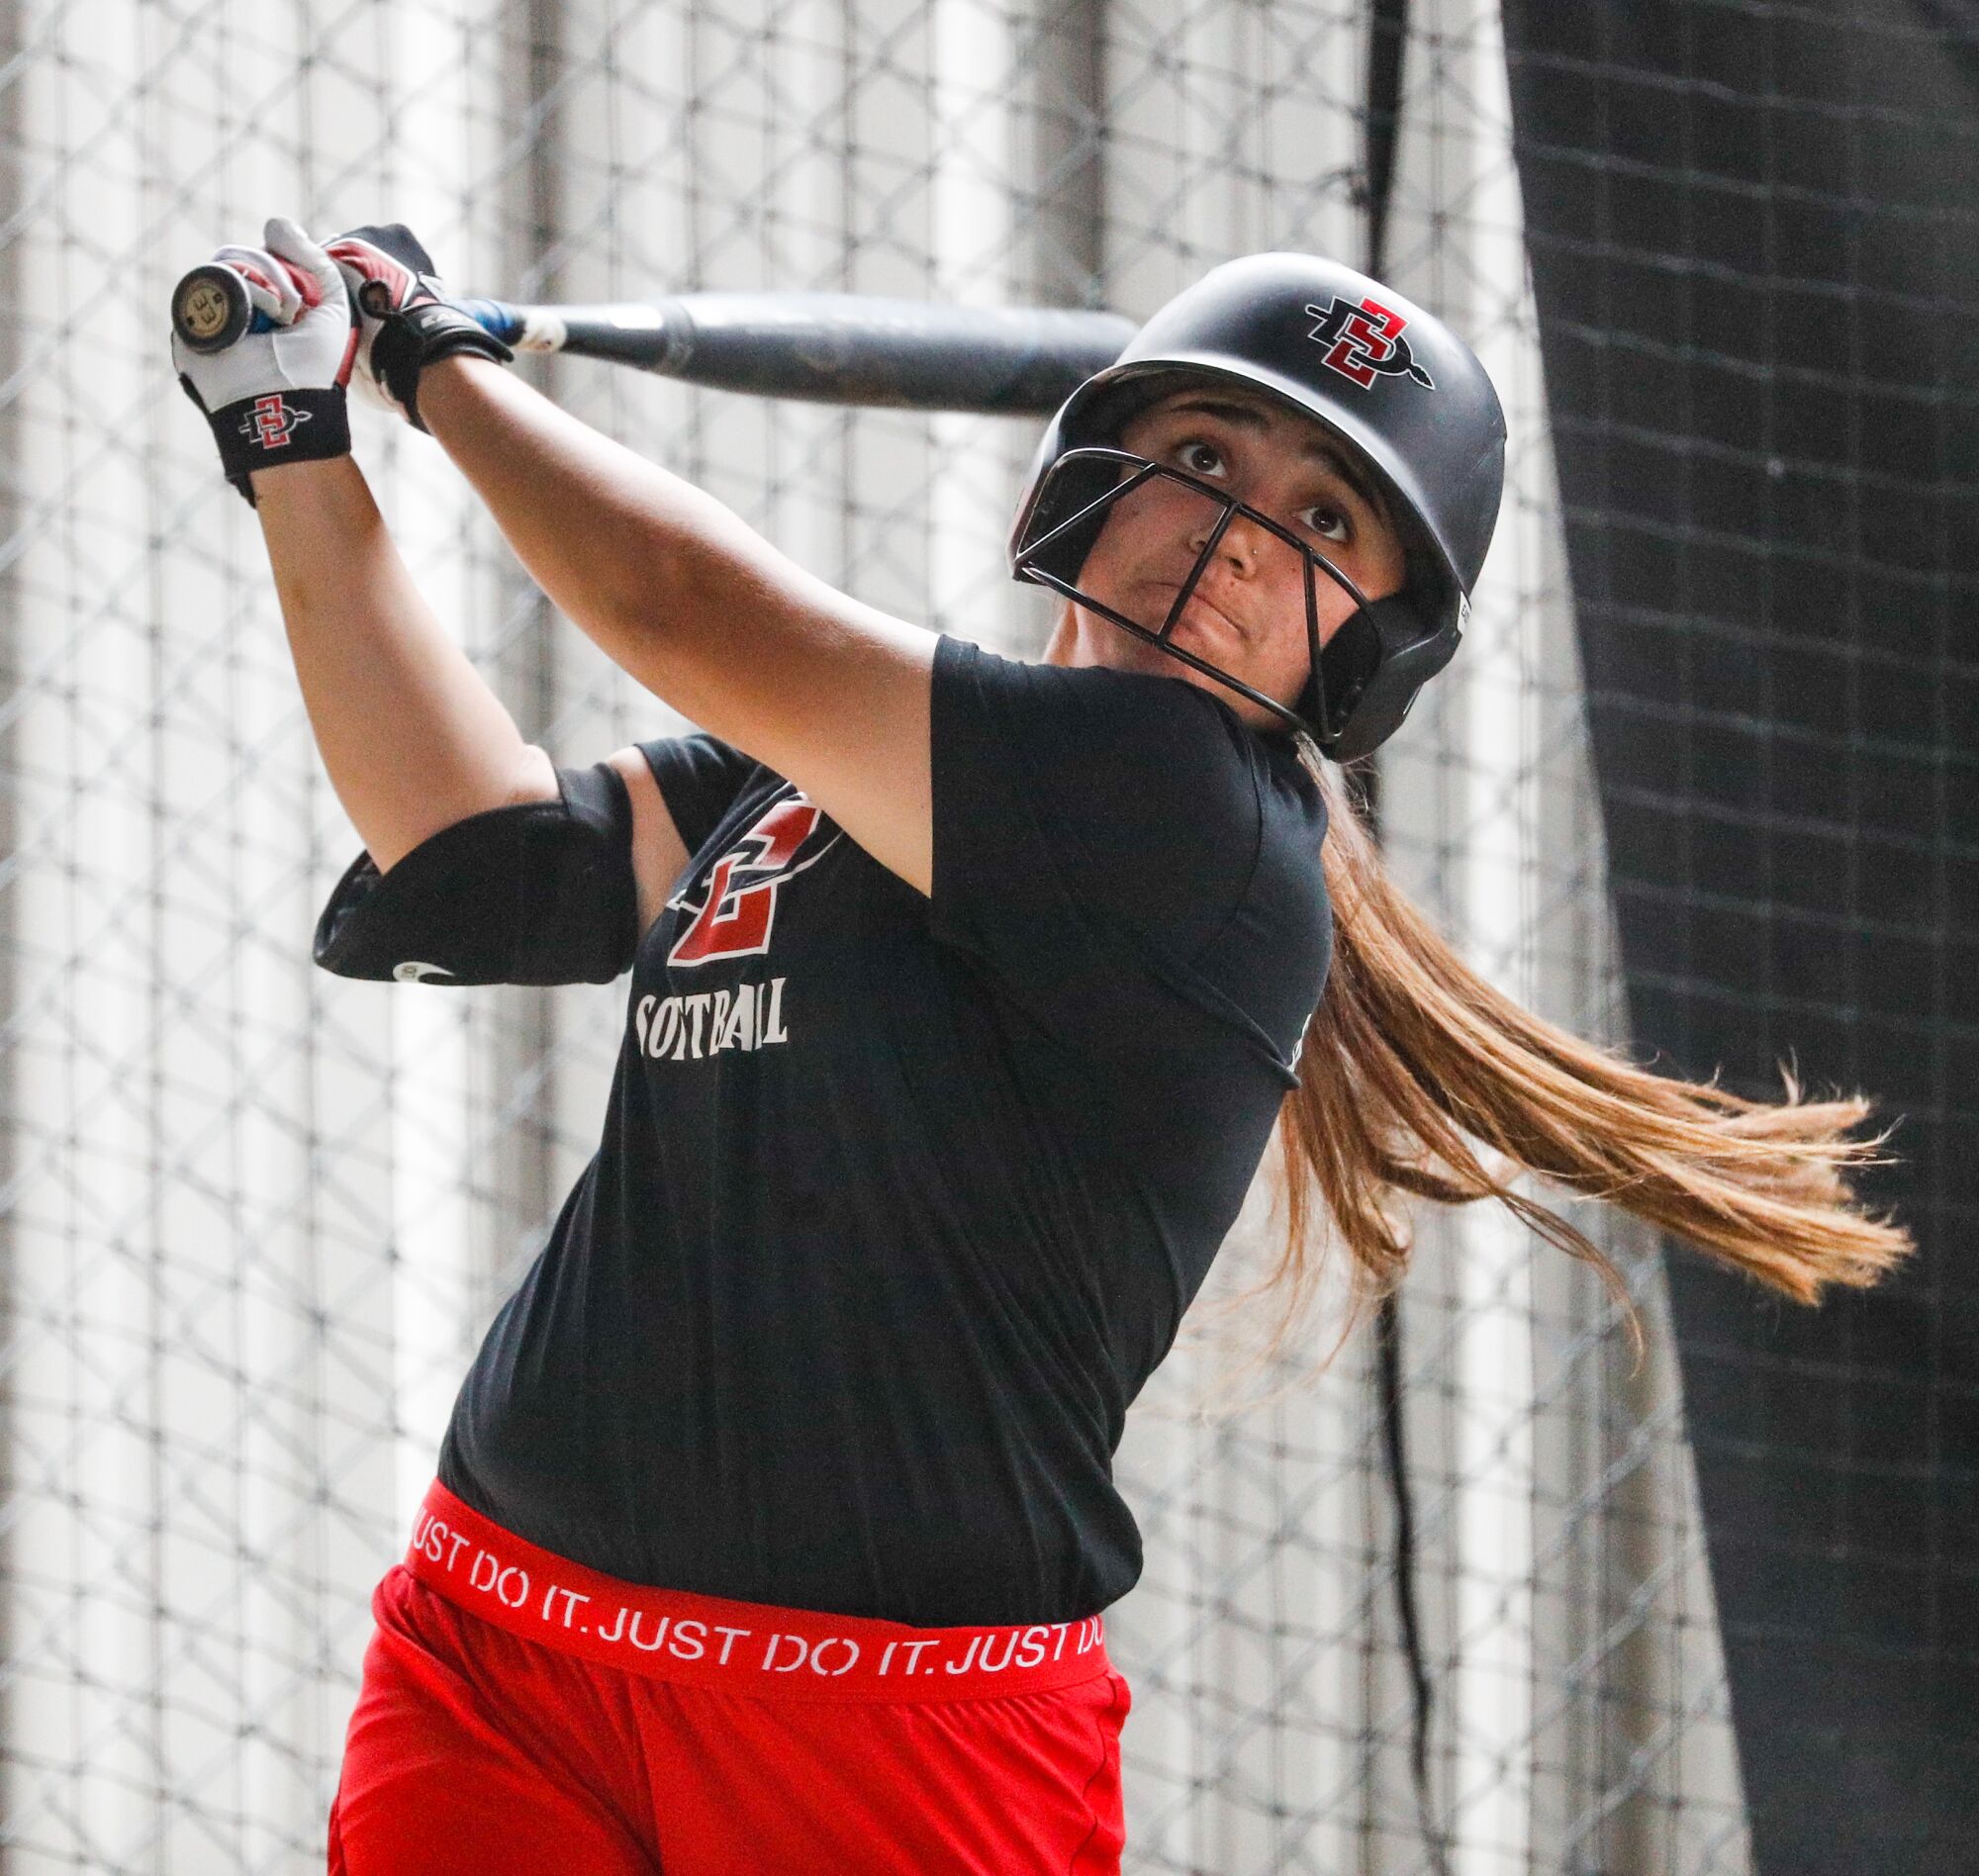 San Diego State infielder Jillian Celis takes a swing in the batting cage during Tuesday's practice.